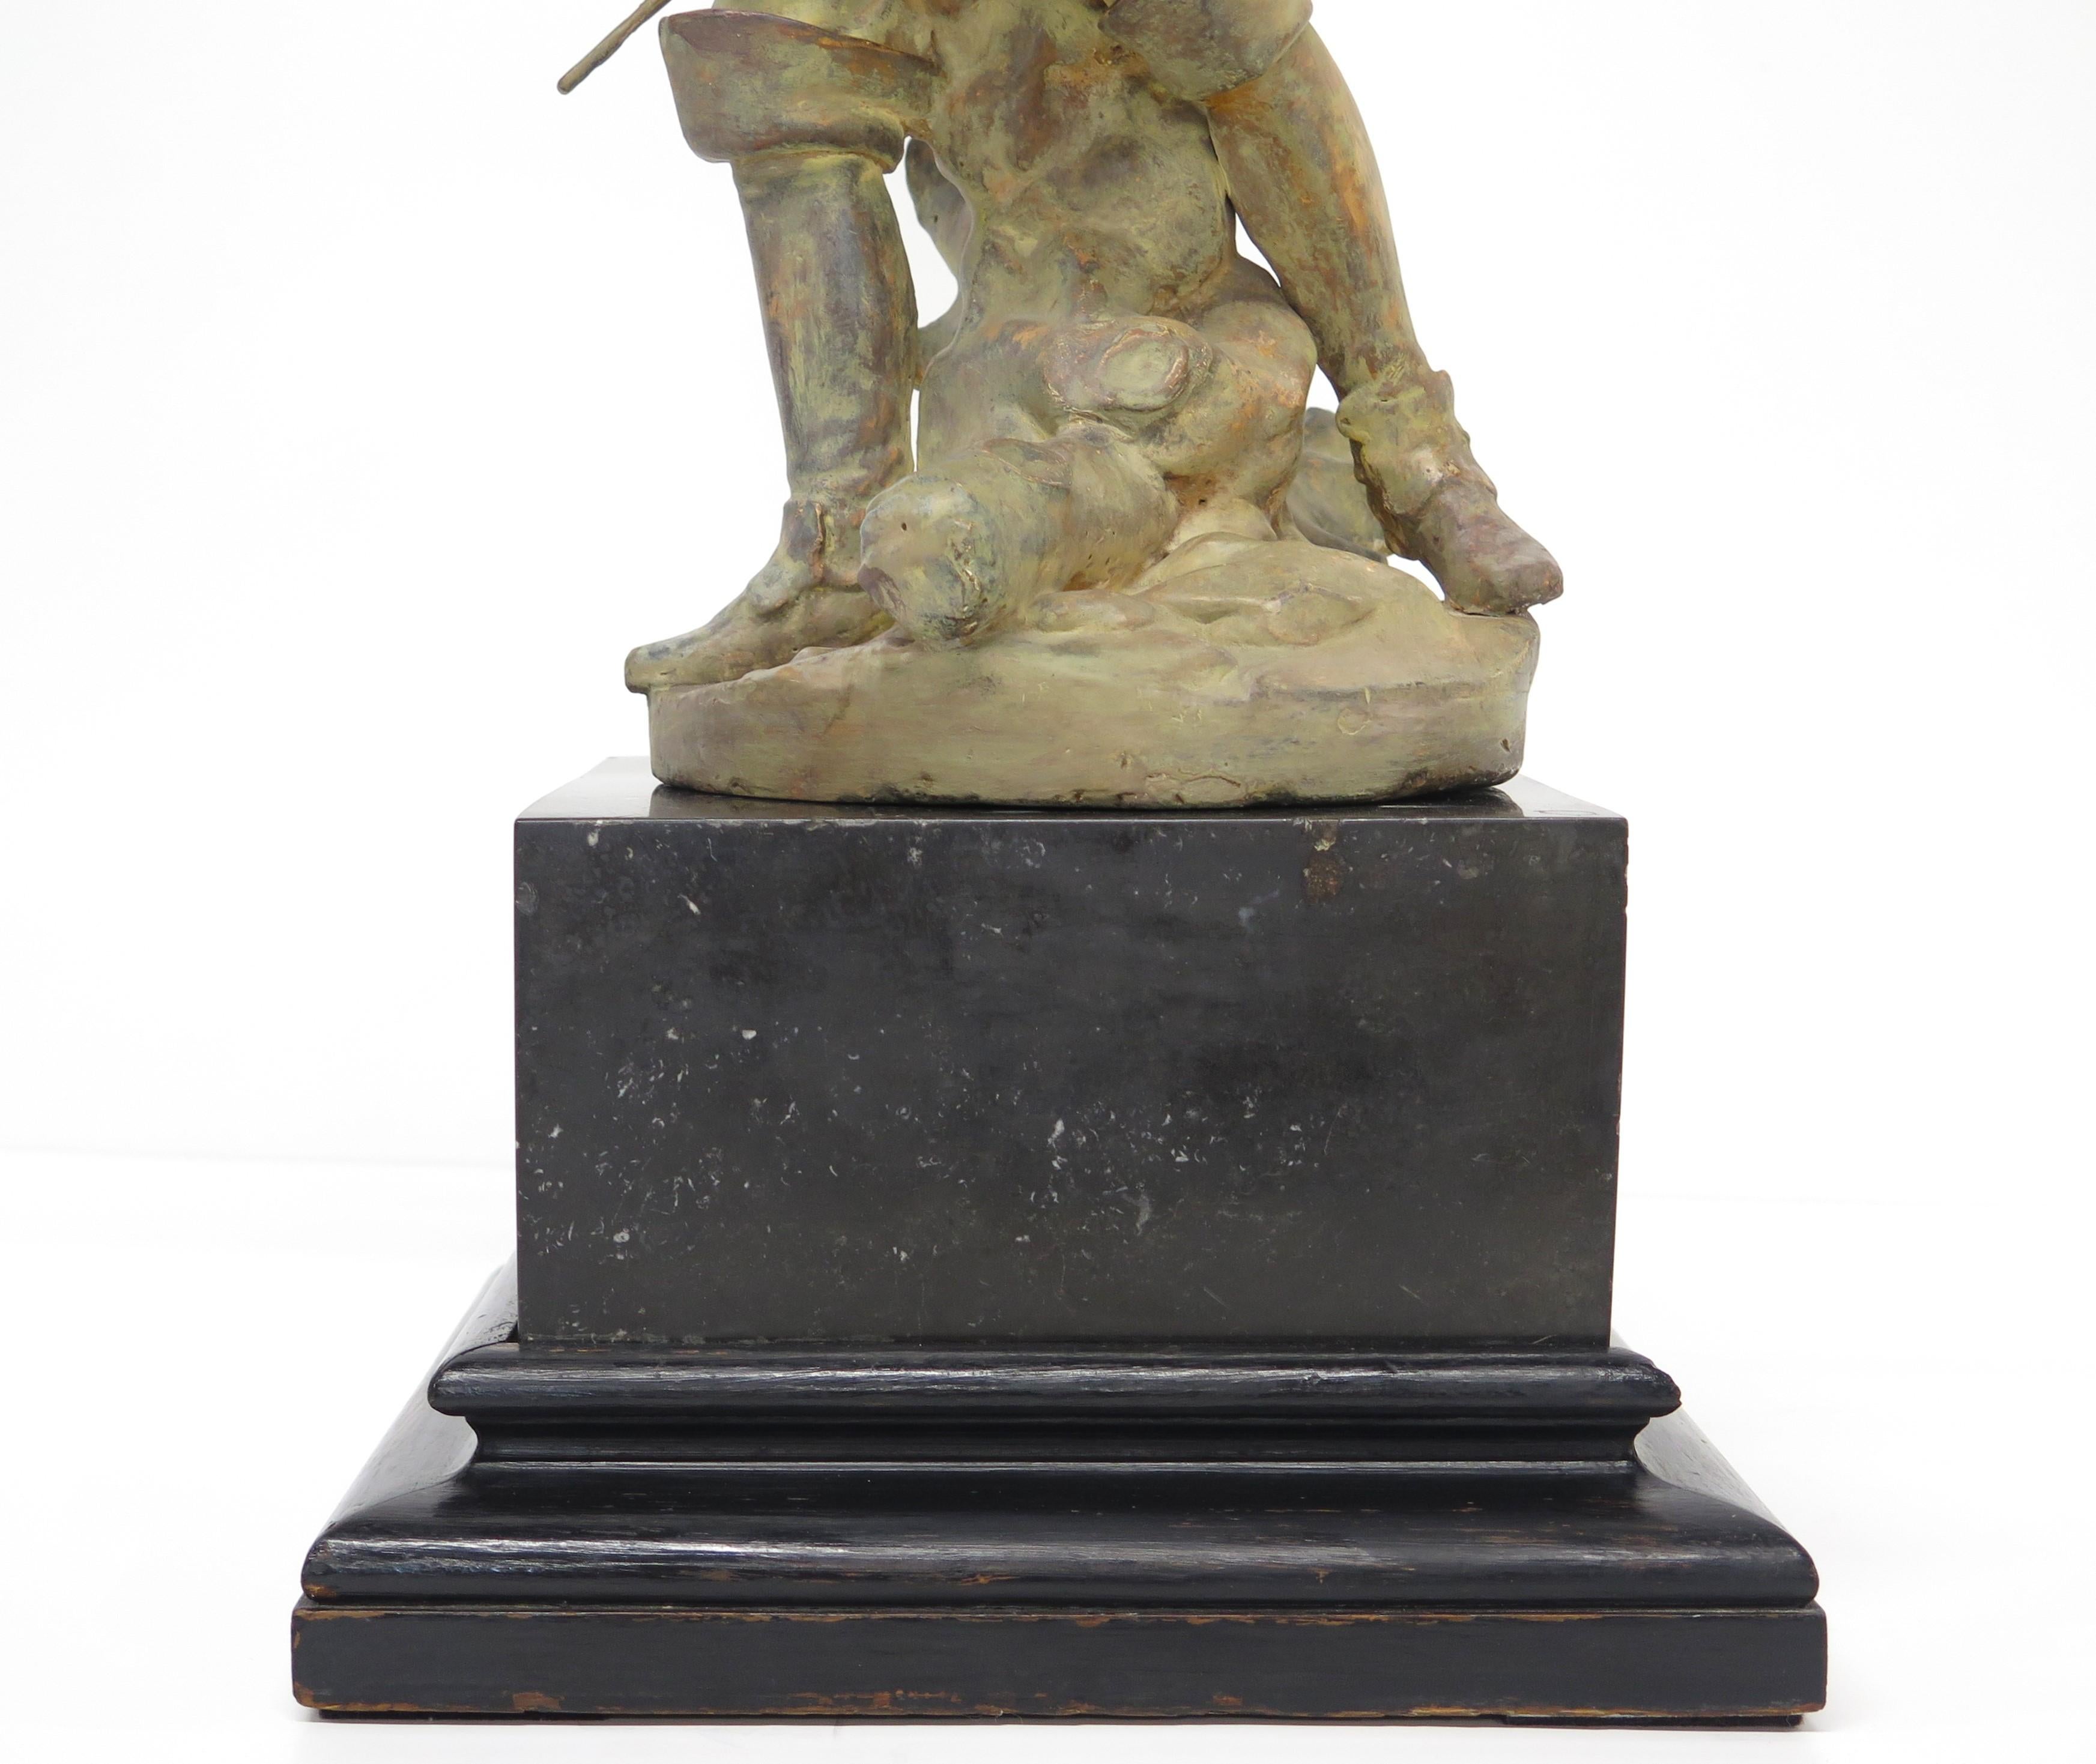 19th Century Terra Cotta Figure After the Bronze by Pierre-Jean David d'Angers 1788 For Sale